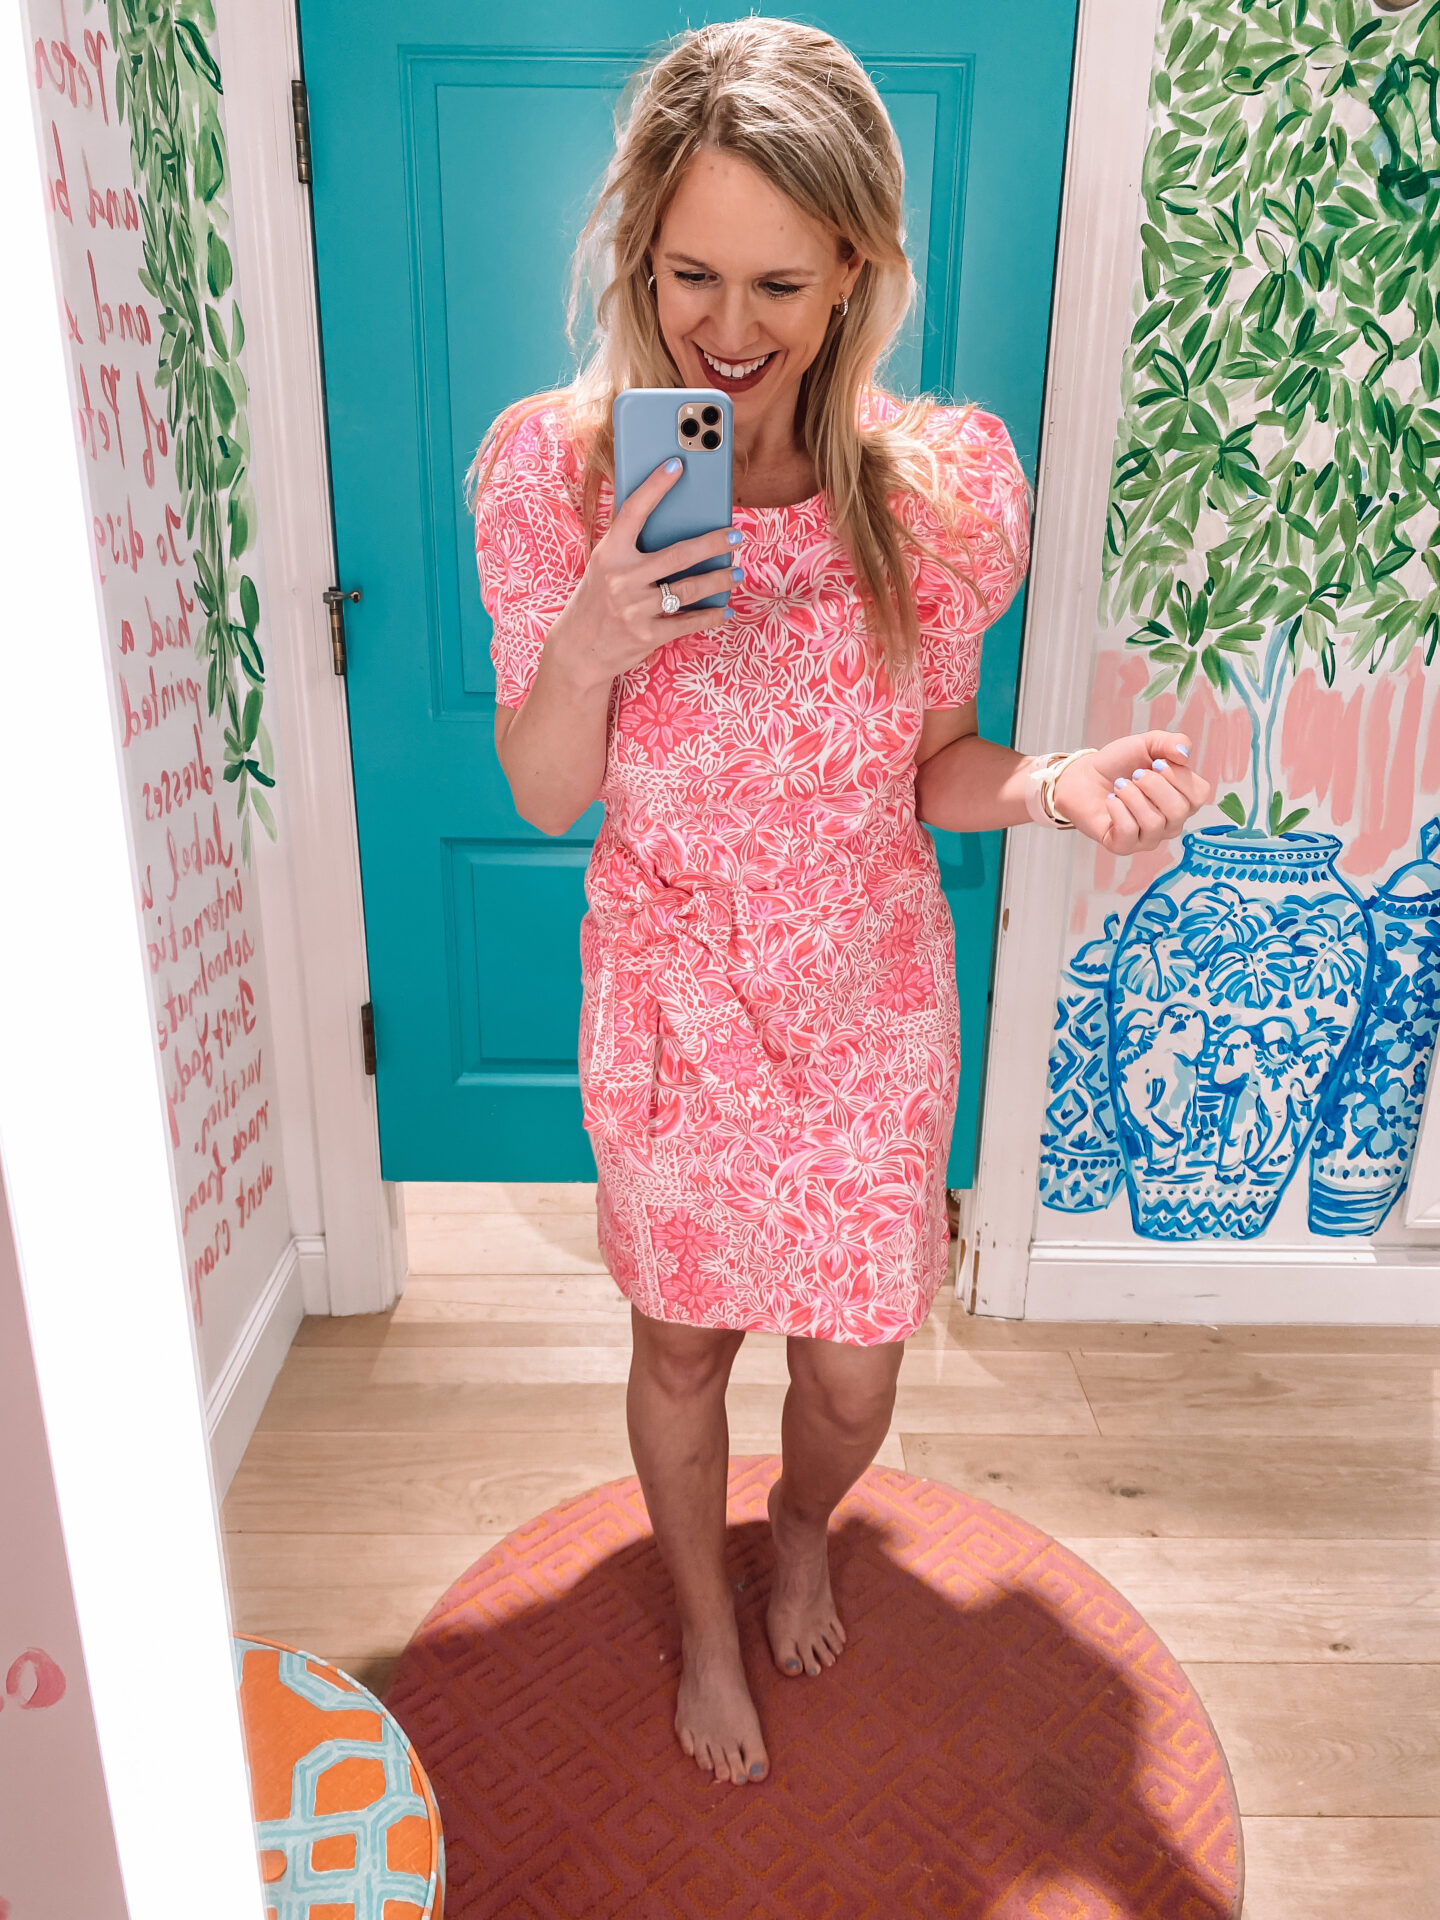 Lilly Sunshine Sale Summer 2022 dates, details and TONS of predictions to help prepare you for the semi-annual Lilly Pulitzer Sale that will begin on September 12th!